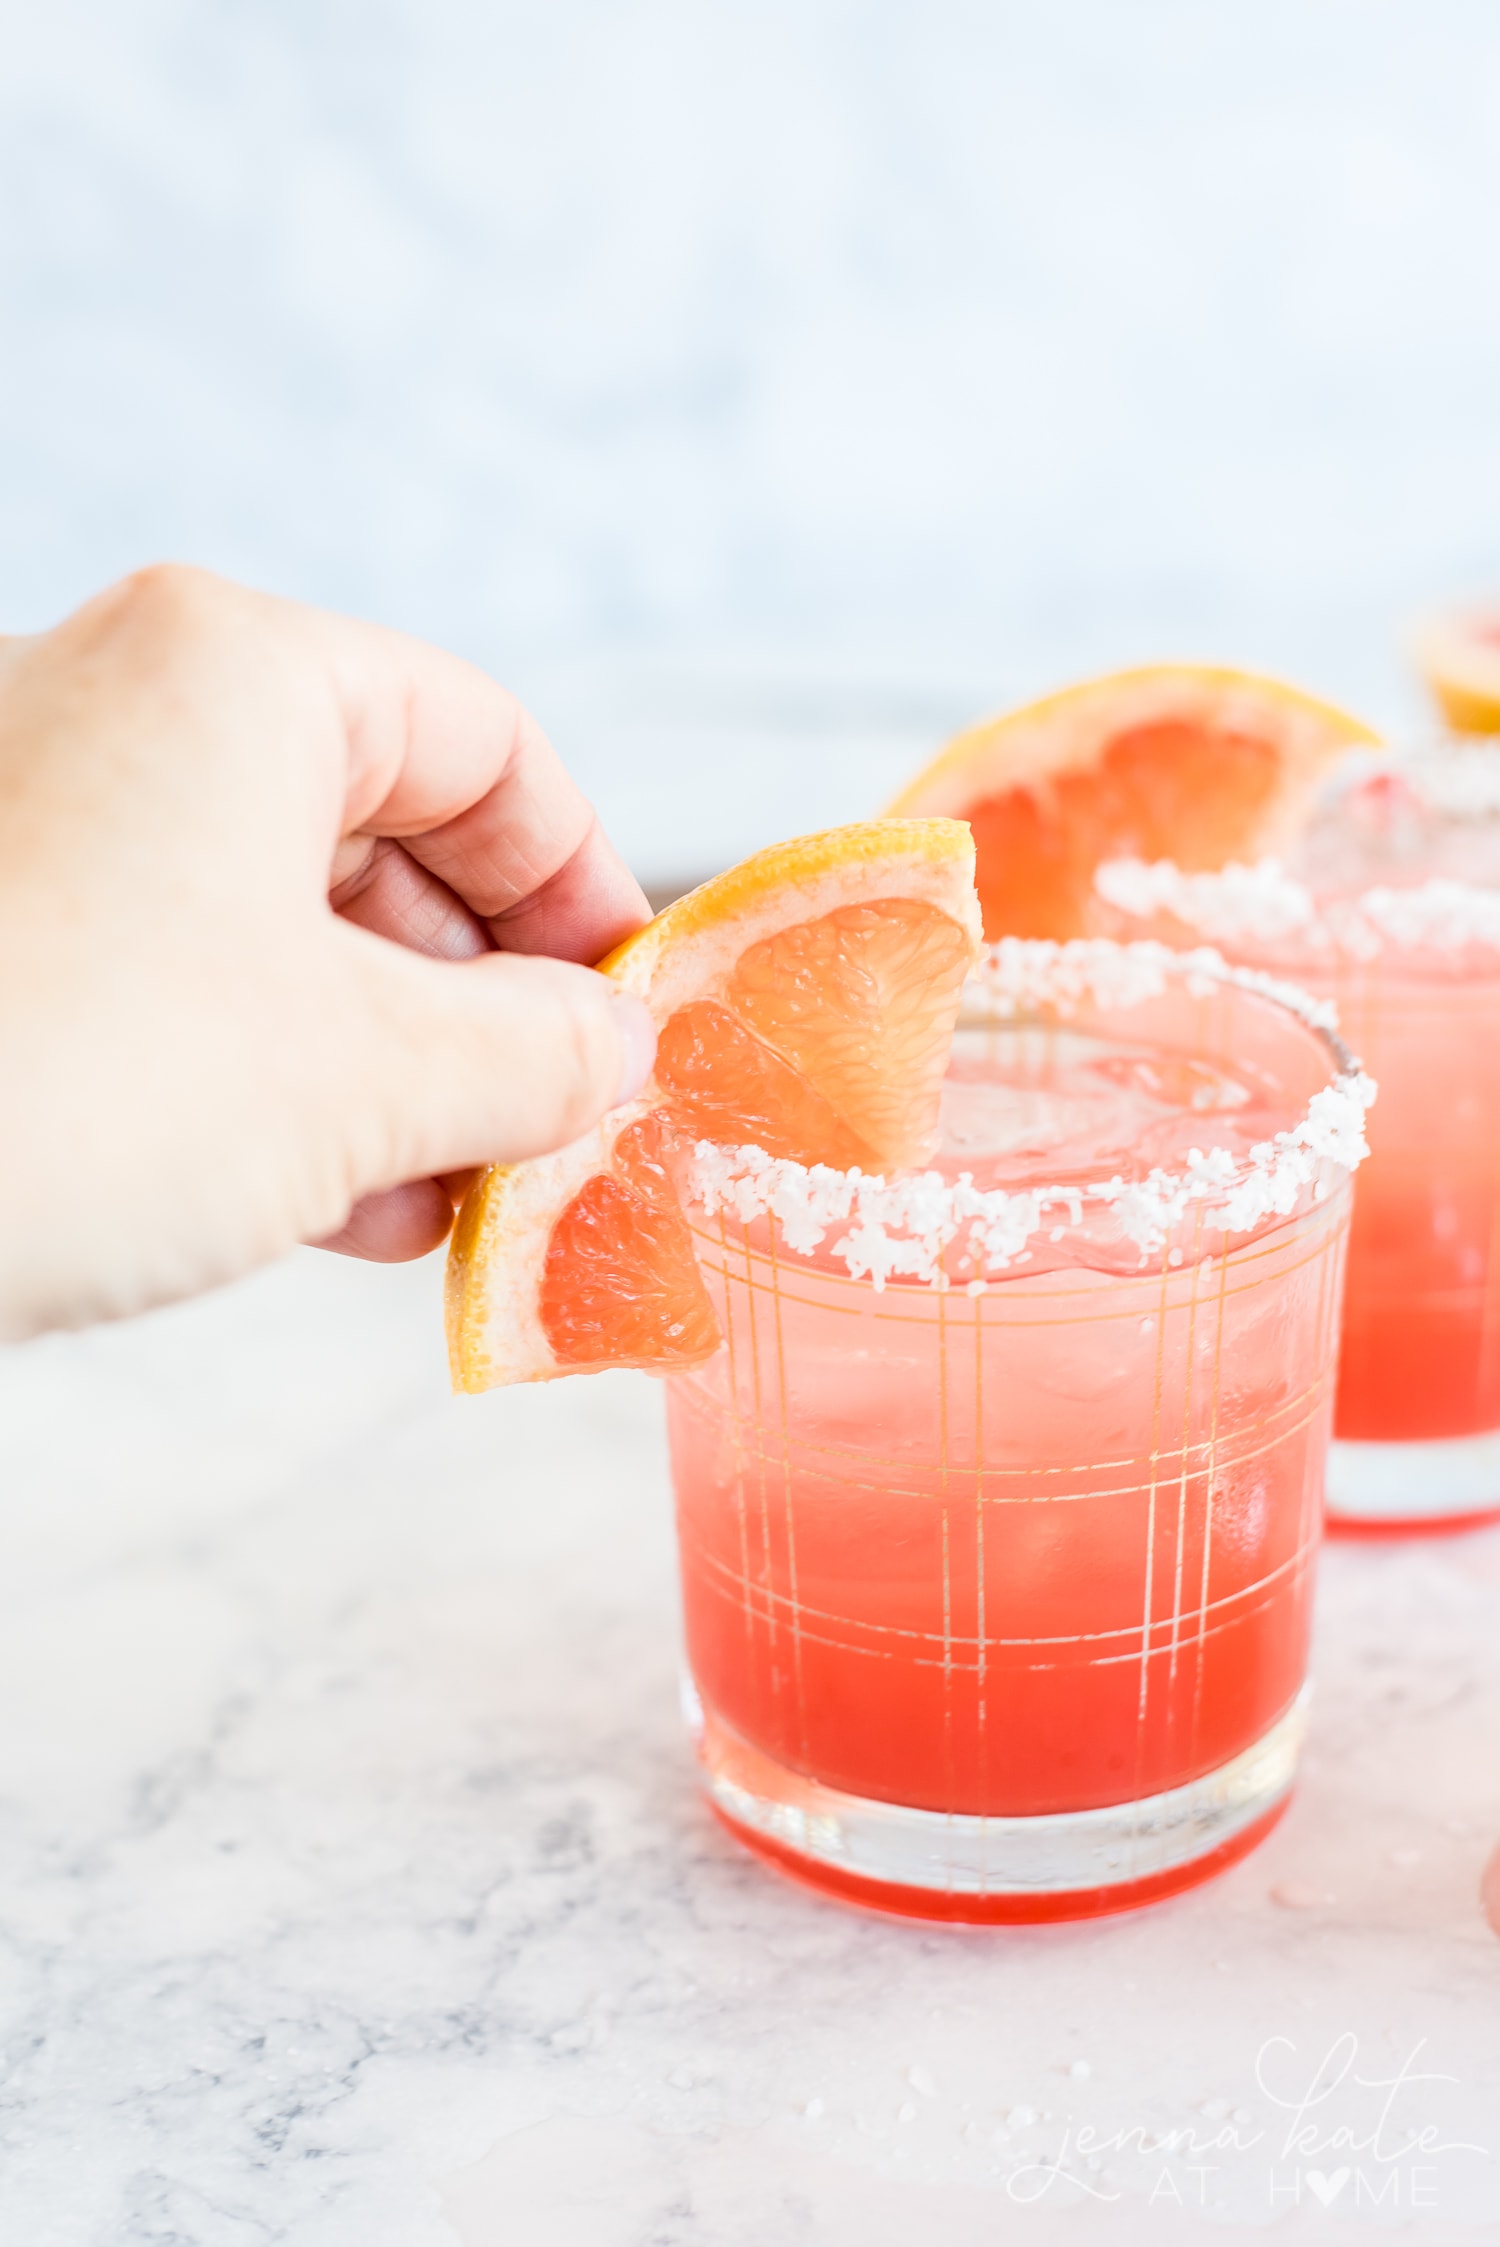 Garnishing the glass with a wedge of grapefruit